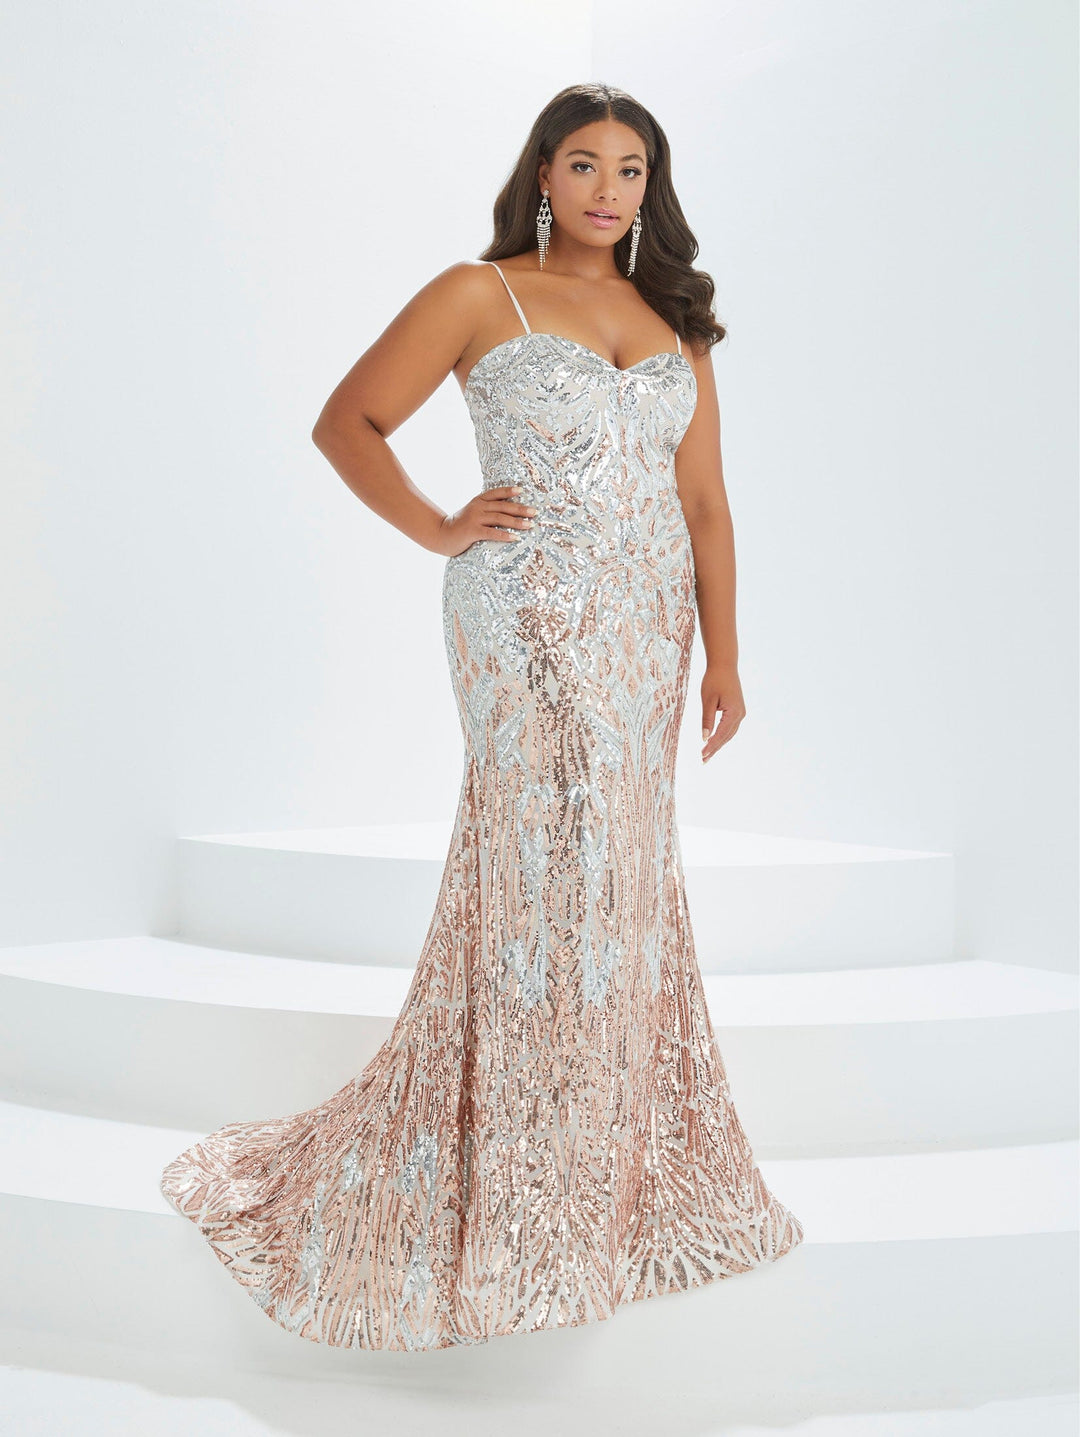 Plus Size Ombre Sequin Mermaid Gown by Tiffany Designs 16042